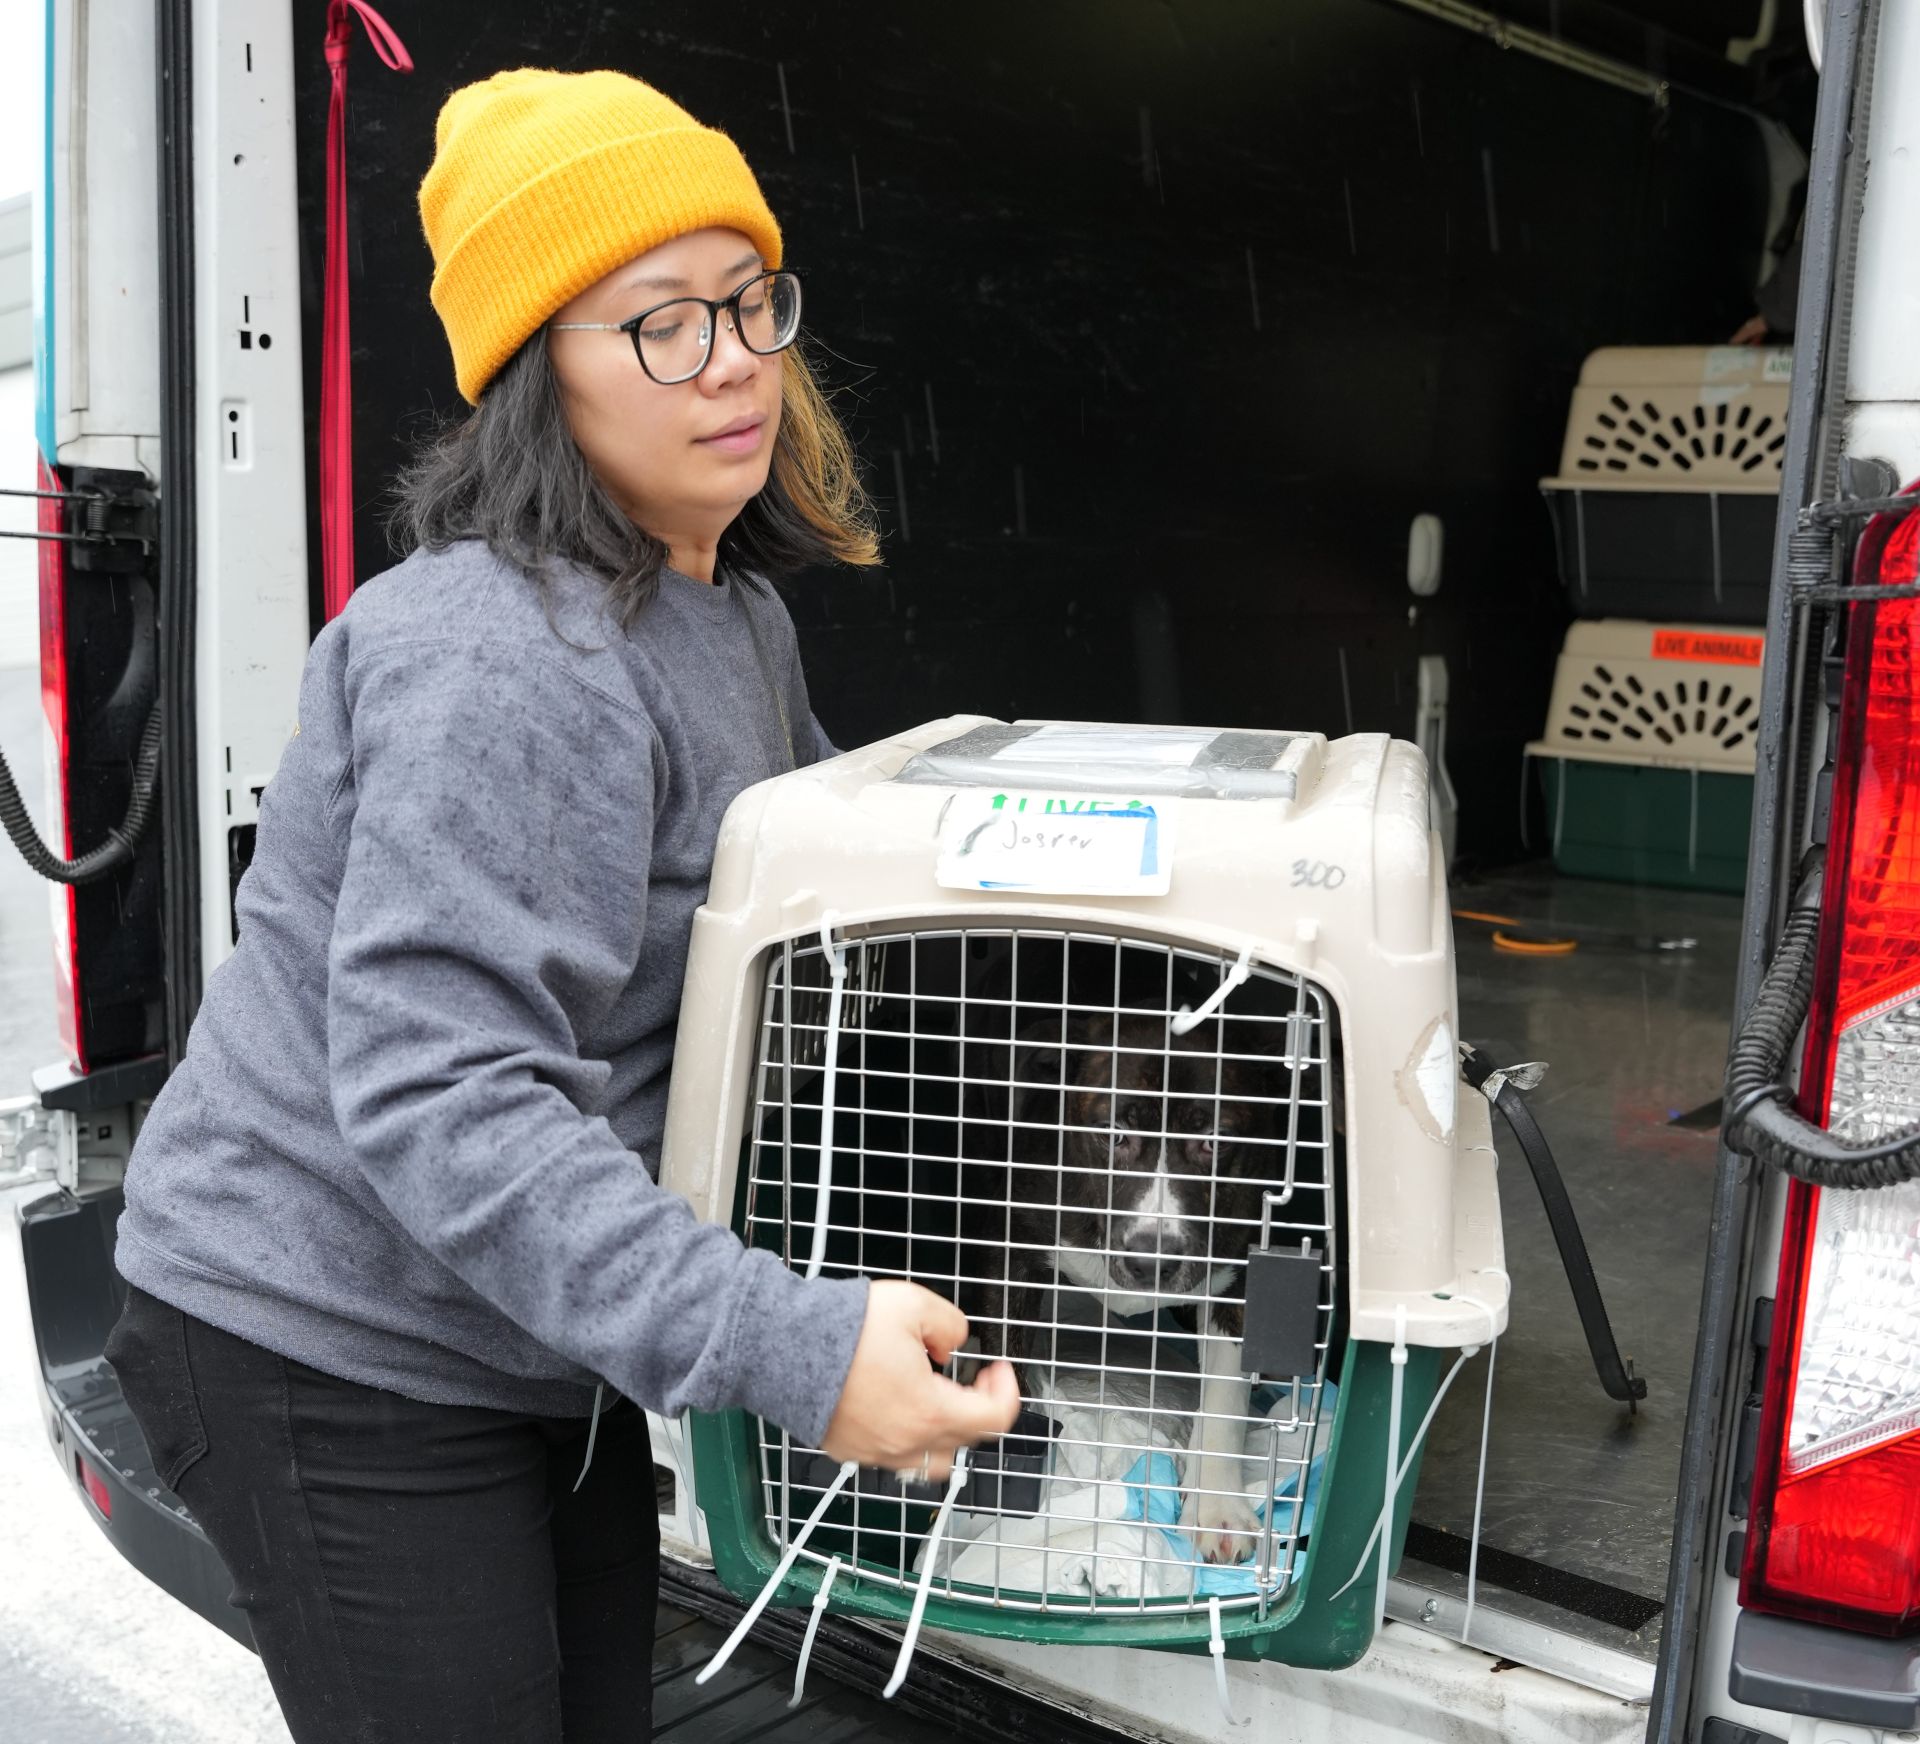 OHS Partners with ASPCA to Fly 60+ Puppies to Safety